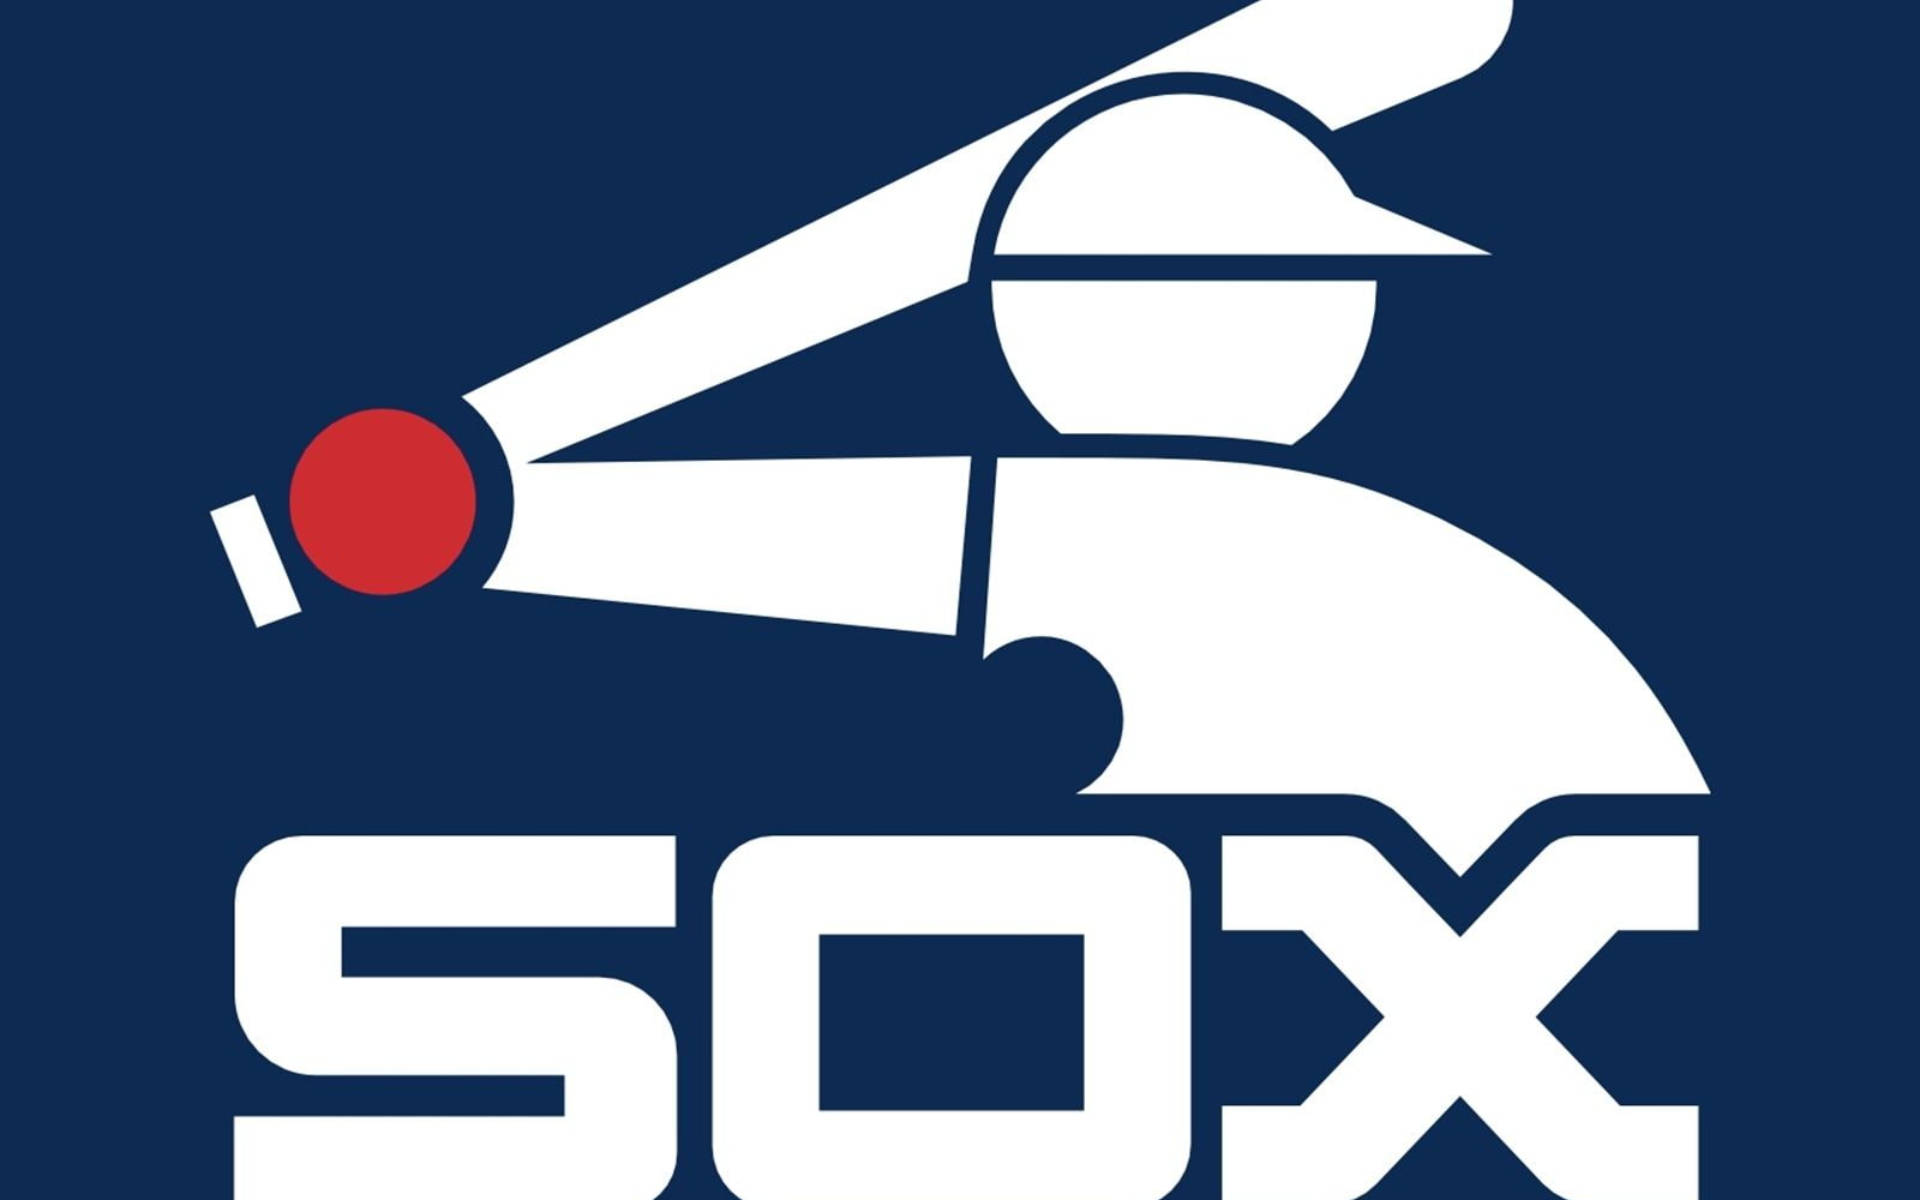 Chicago White Sox In Blue